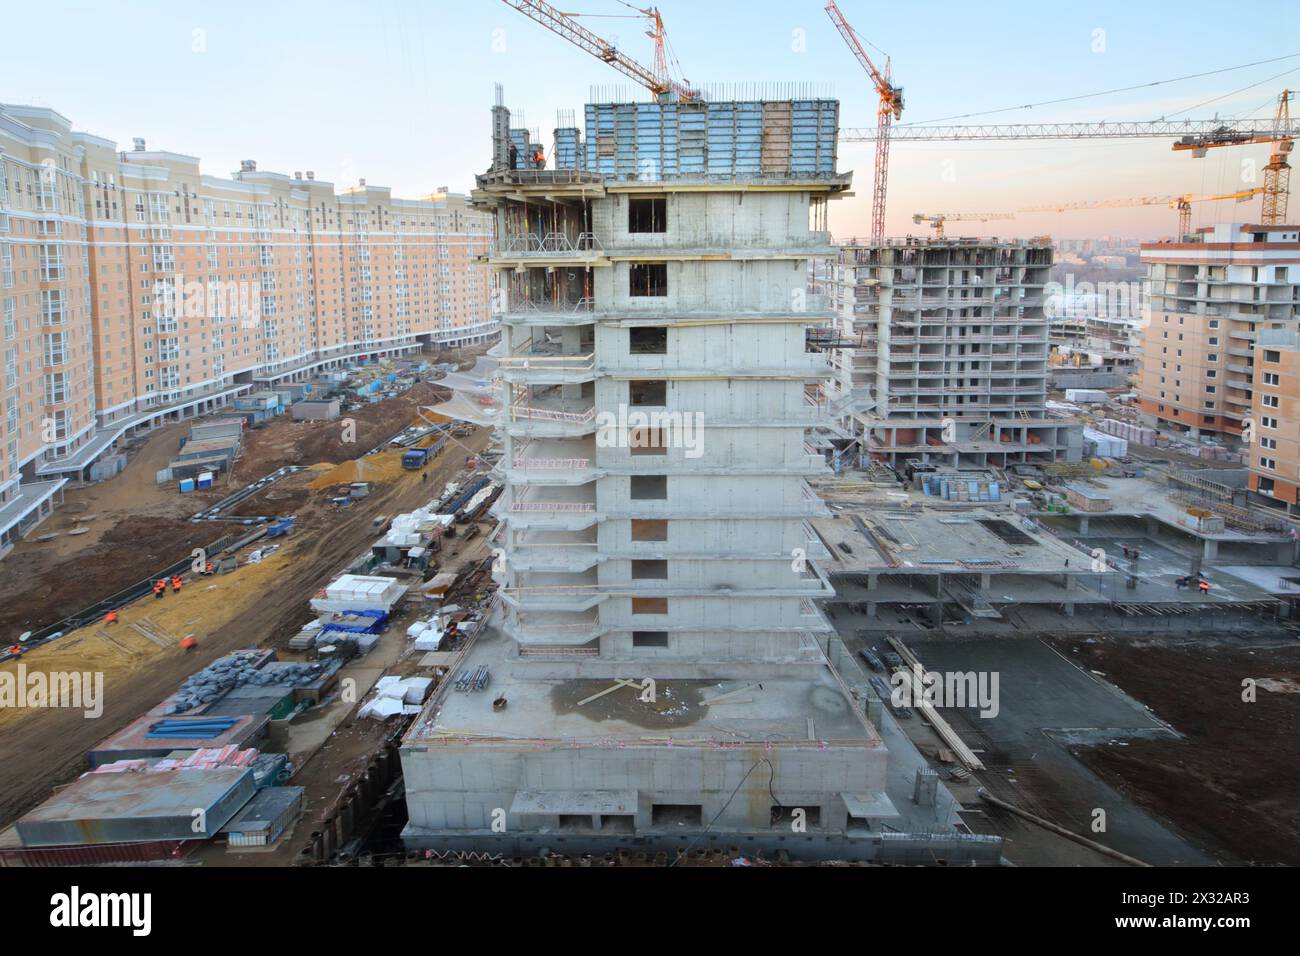 MOSCOW - NOVEMBER 23: Buildings under construction in complex Tsaritsino, on November 23, 2012 in Moscow, Russia. Tsaritsino District is 15 residentia Stock Photo